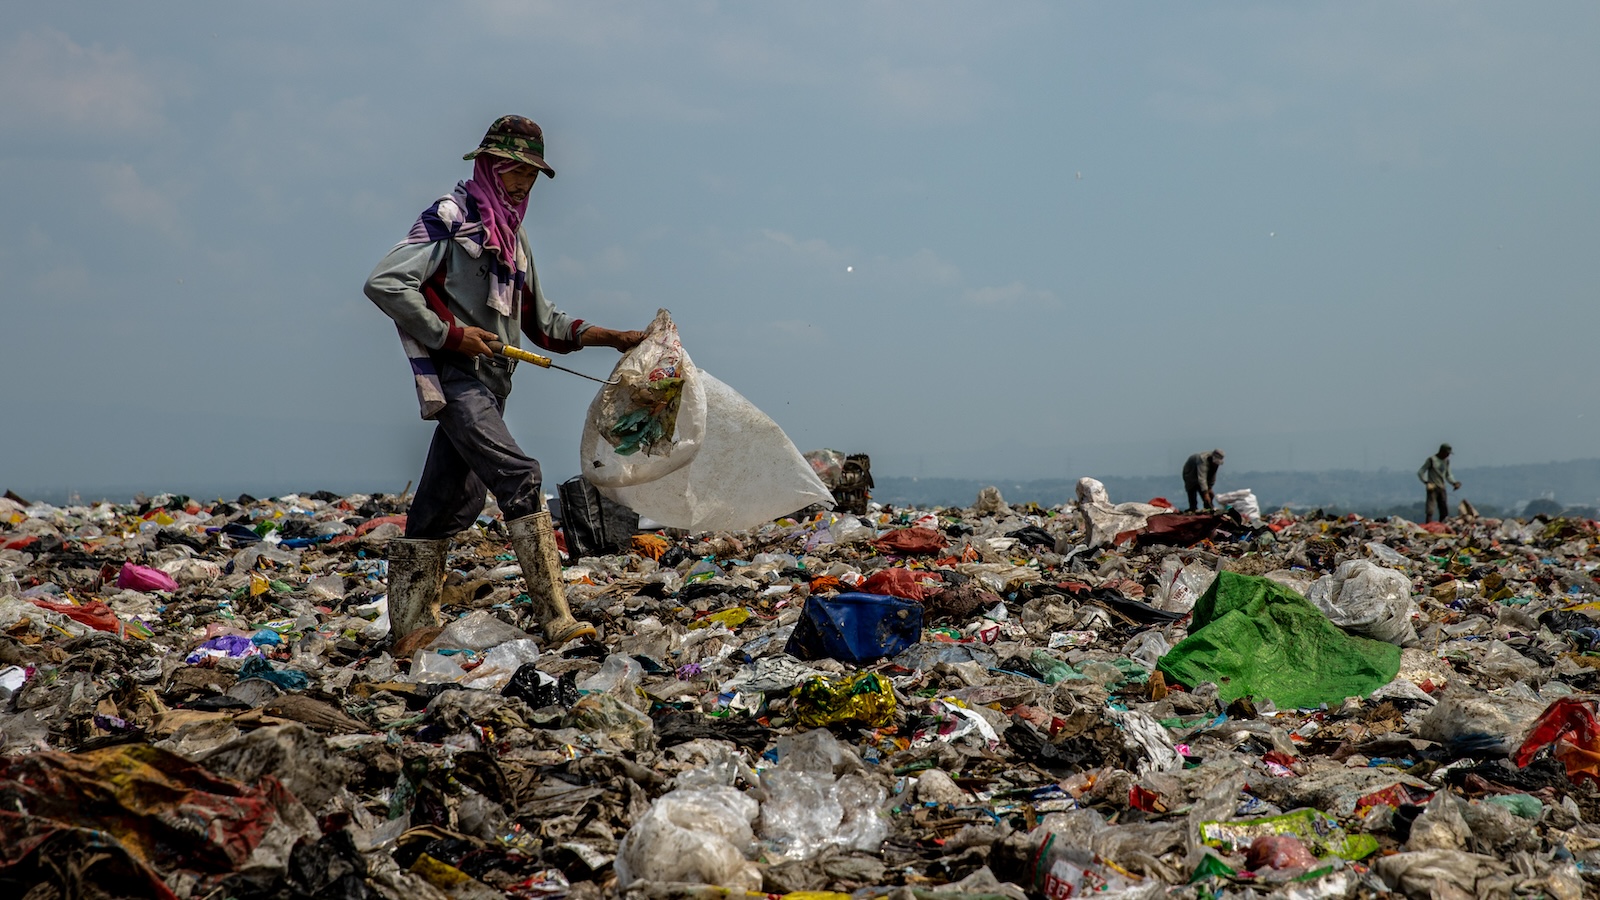 A person picks up trash in a landfill